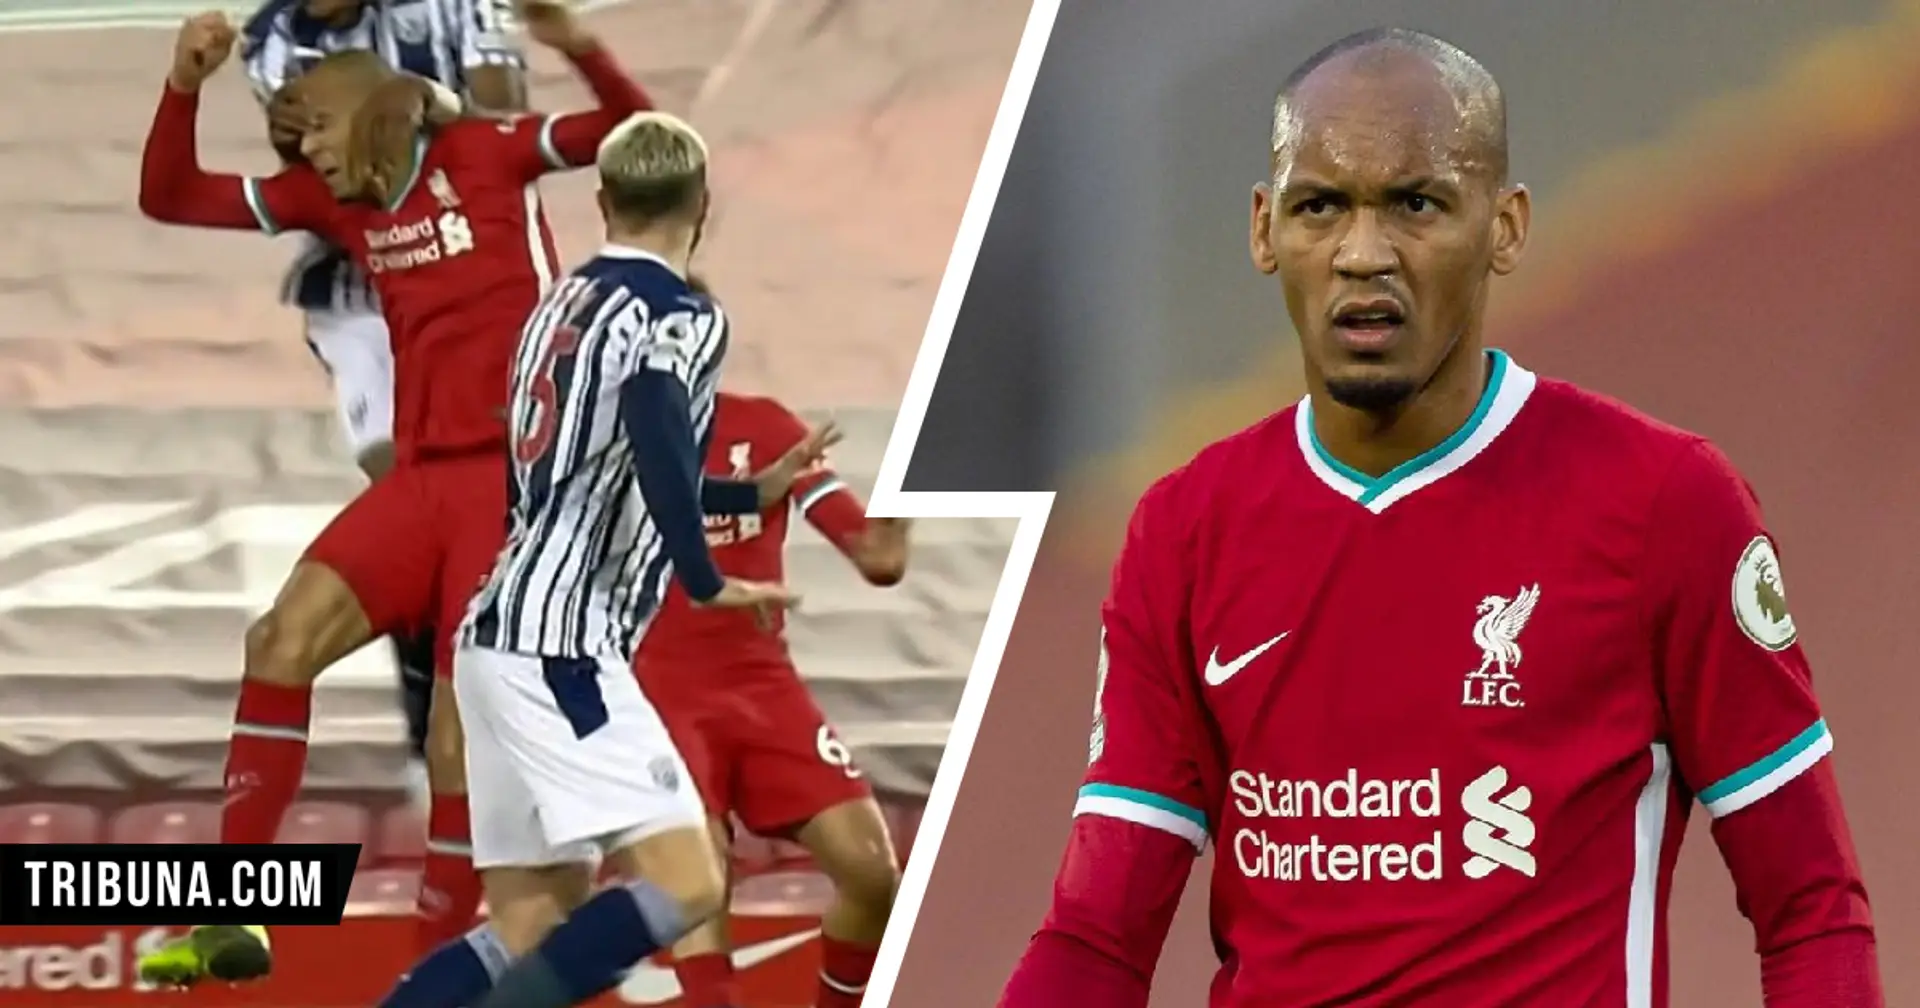 Replay reveals possible foul on Fabinho during West Brom's equalizer